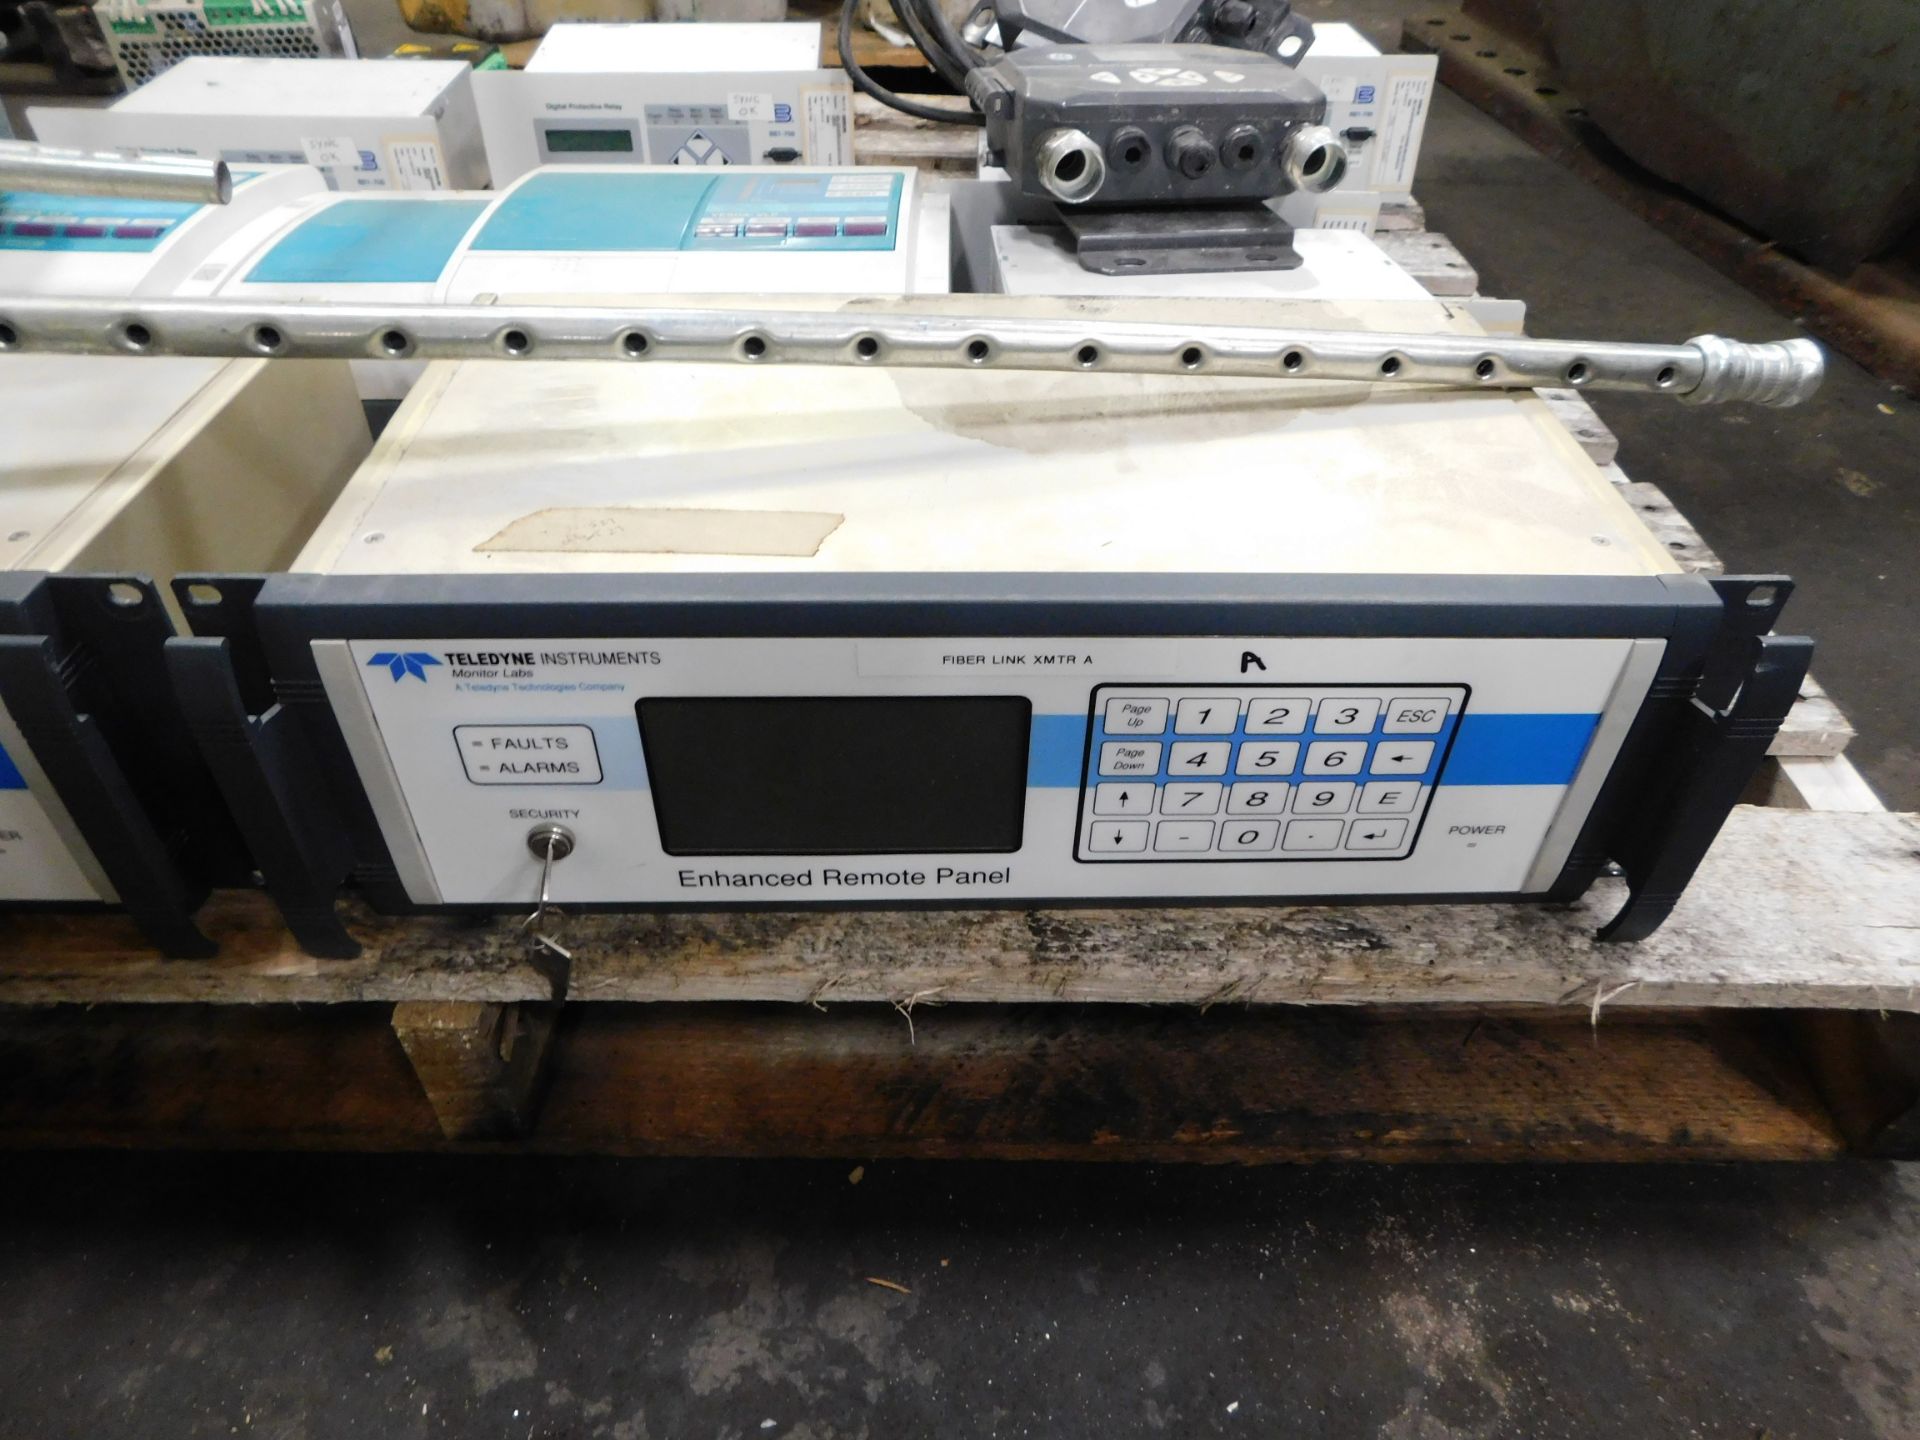 Pallet of Miscellaneous Testing Equipment - Teledyne, GE, etc. - Image 3 of 6